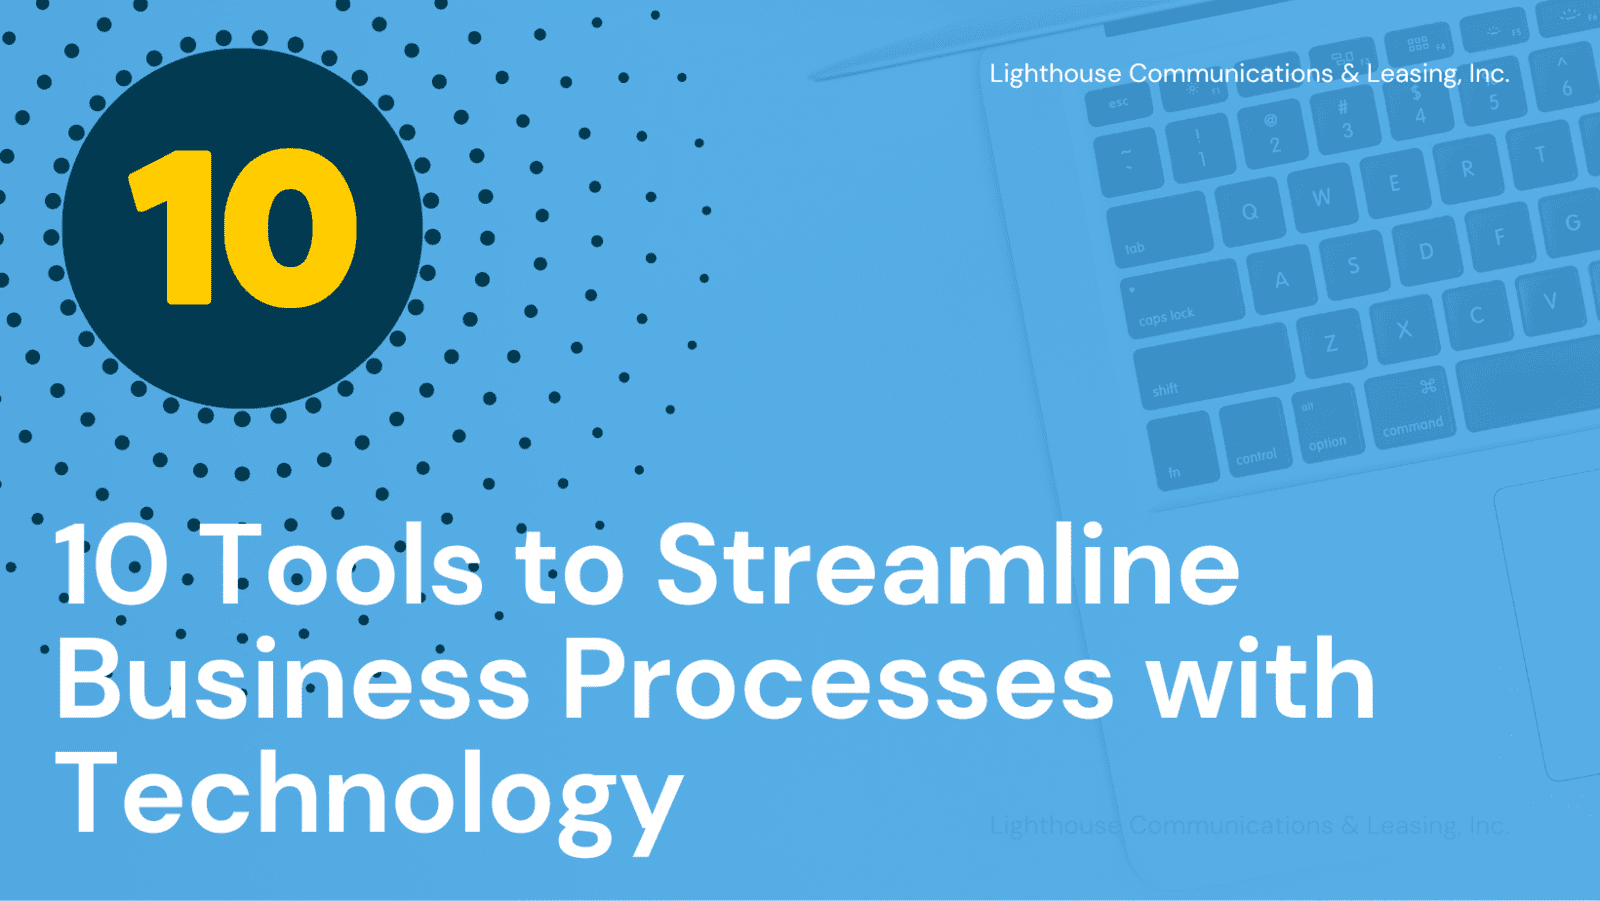 10 Tools to Streamline Business Processes with Technology